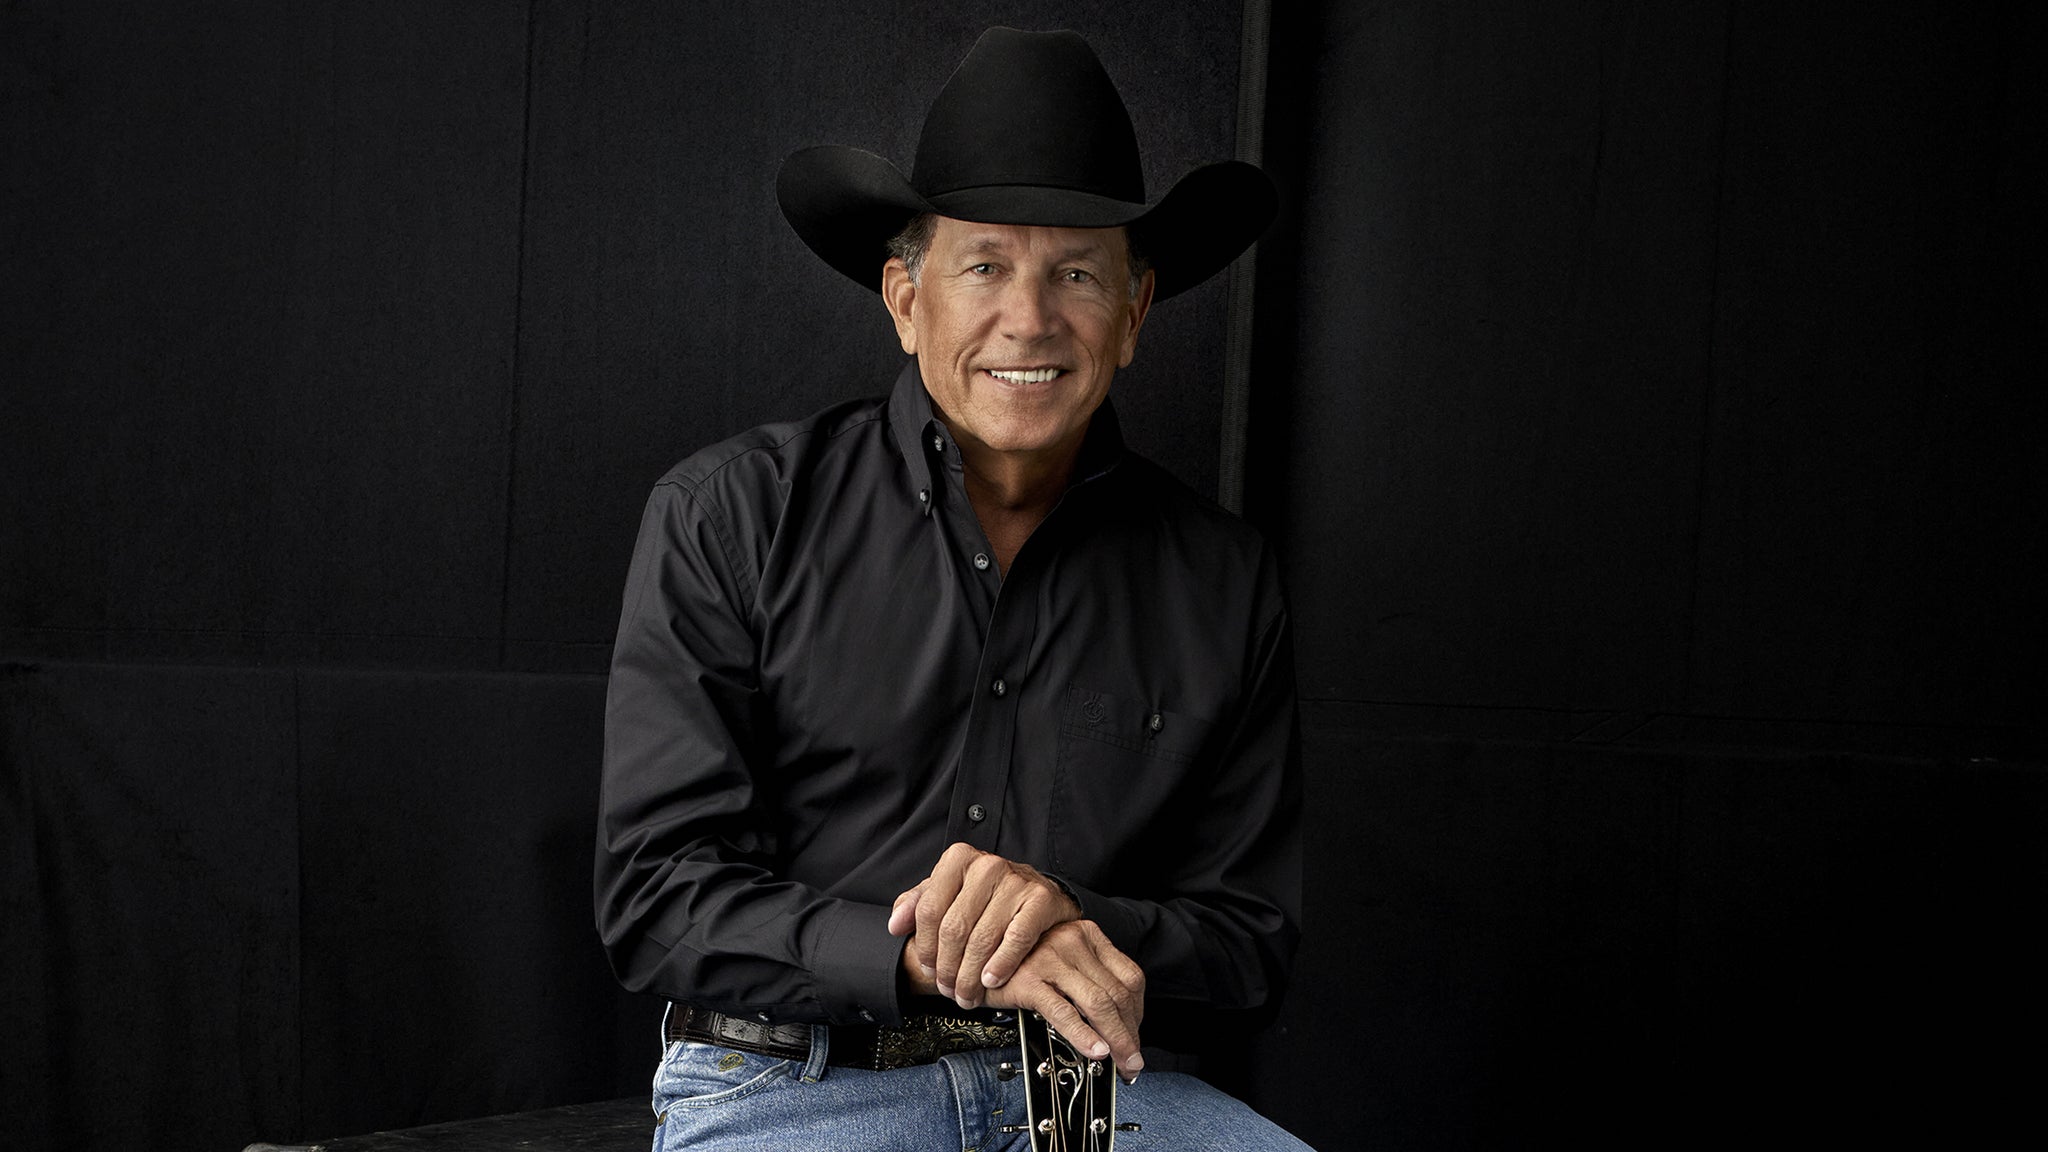 Image used with permission from Ticketmaster | Suites: George Strait tickets